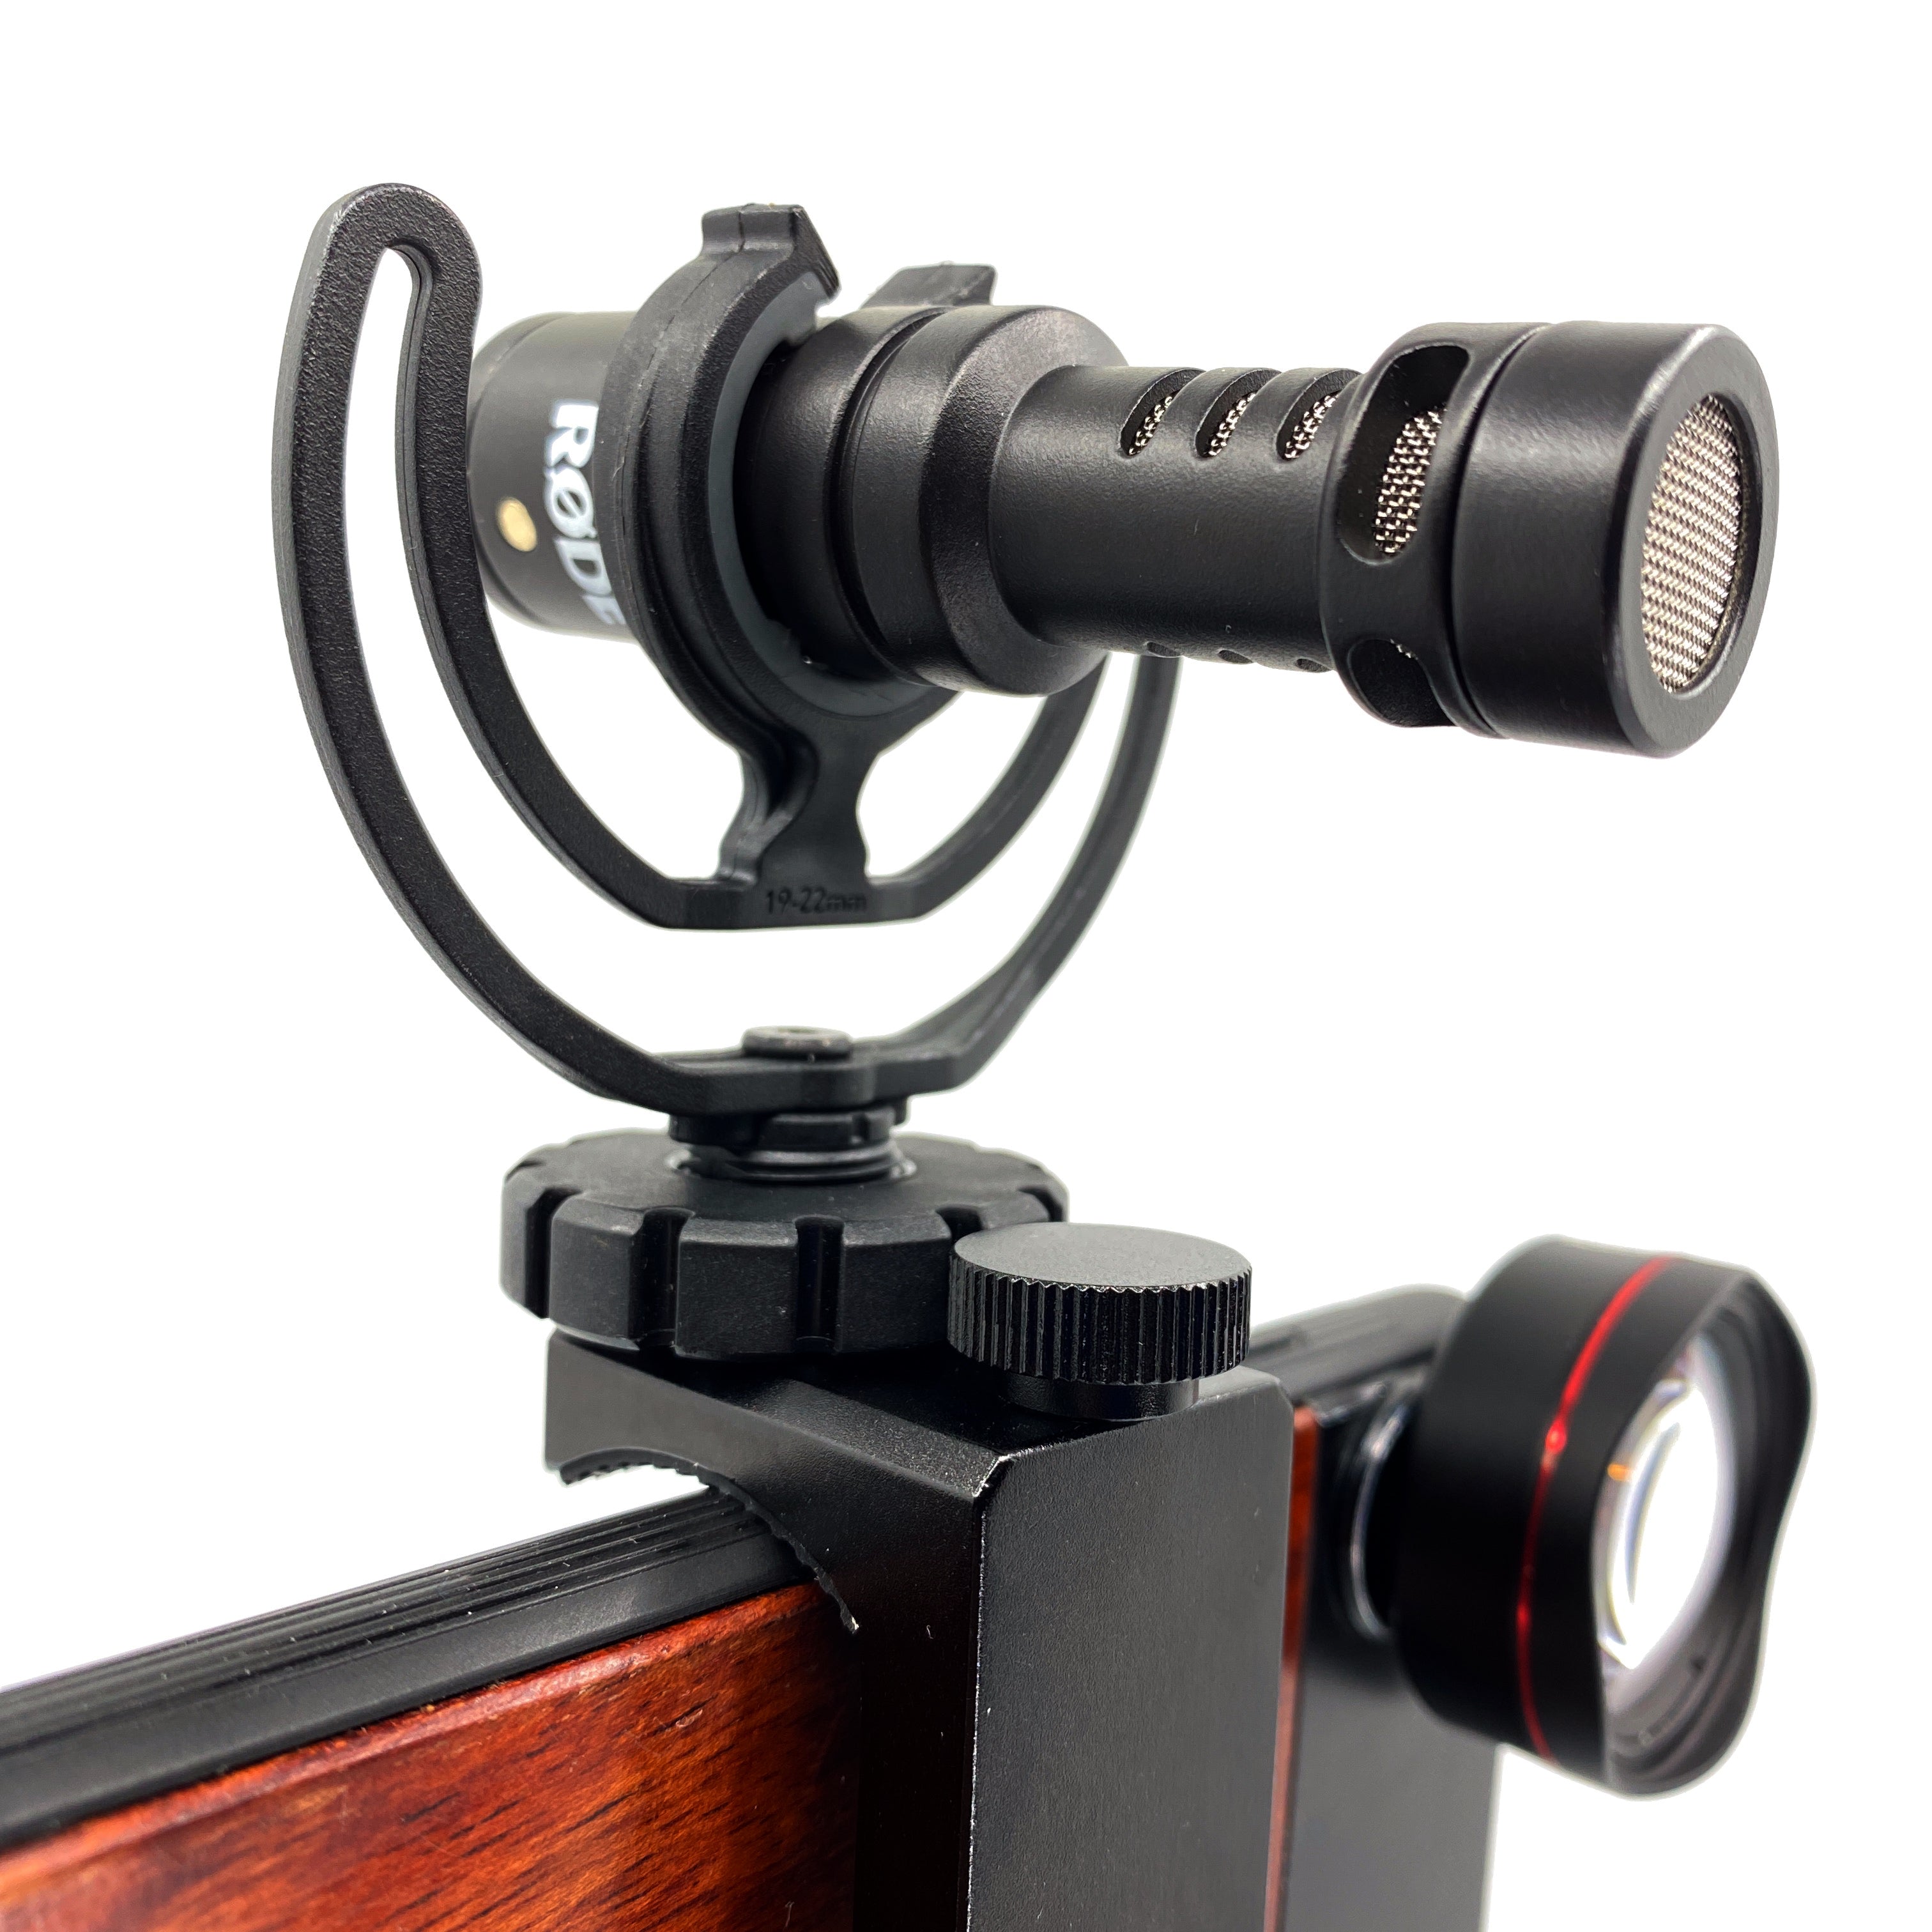 iOgrapher Phone Holder With Shoe